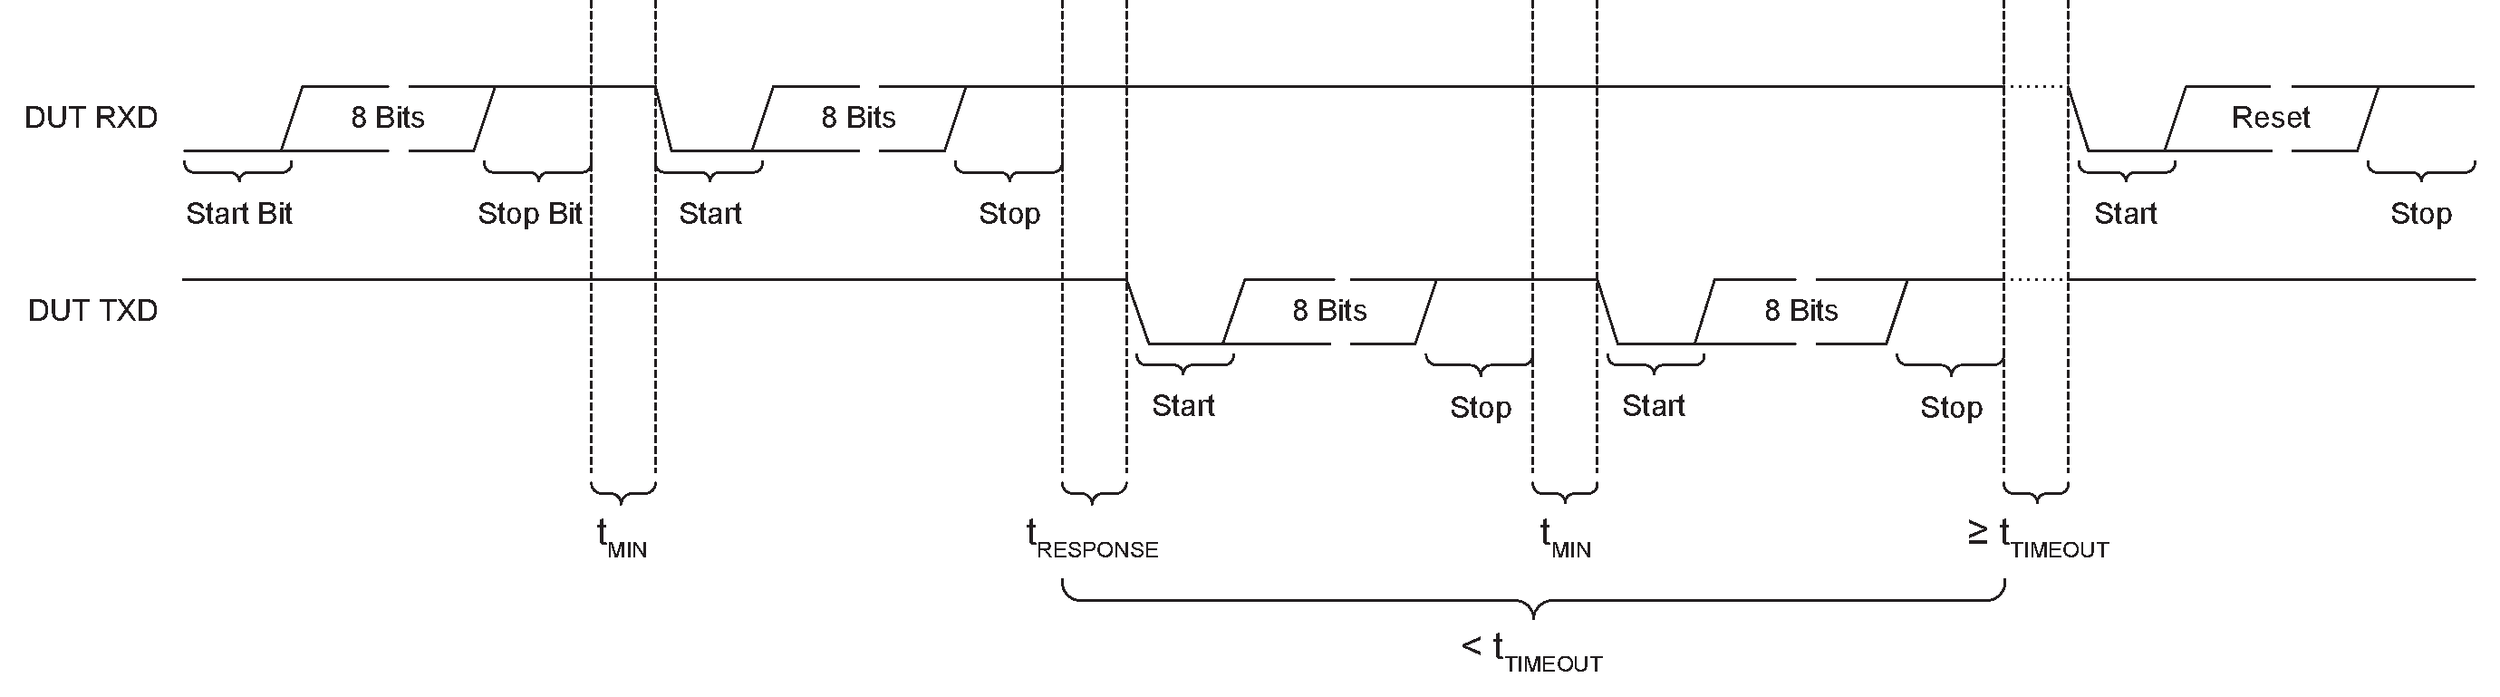 Command and event timing on 2-wire UART interface showing timeout